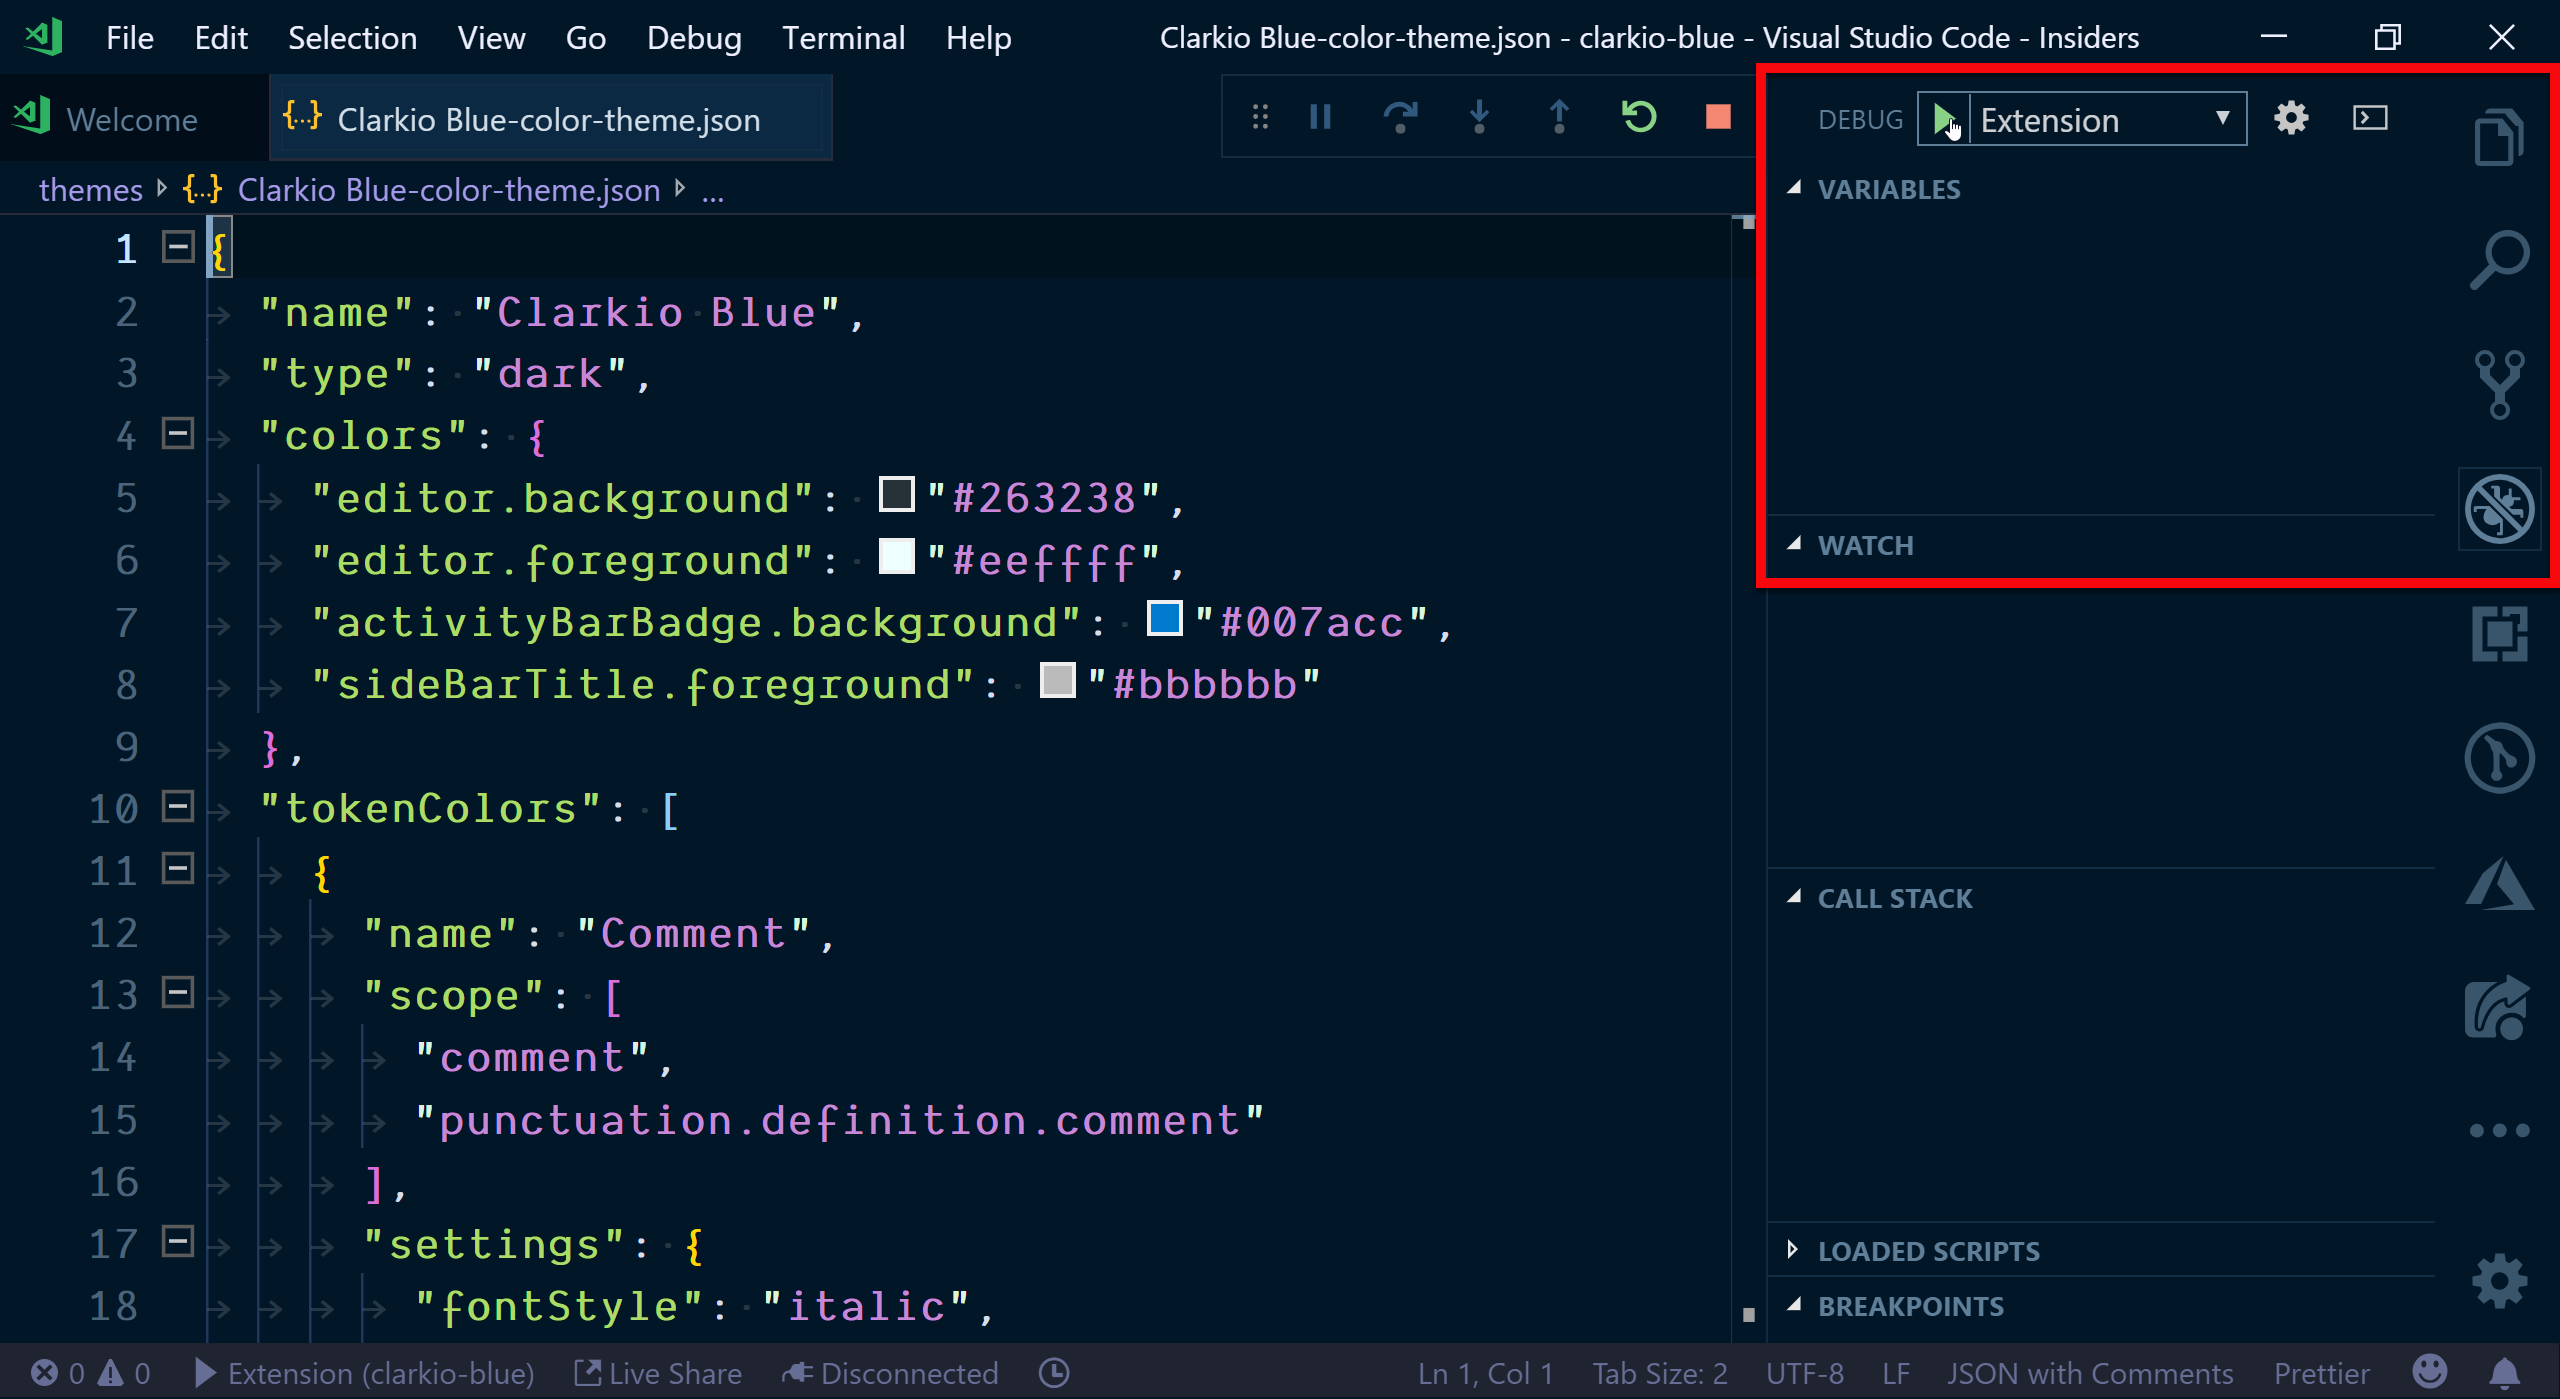 VS Code with the current color theme .json file open